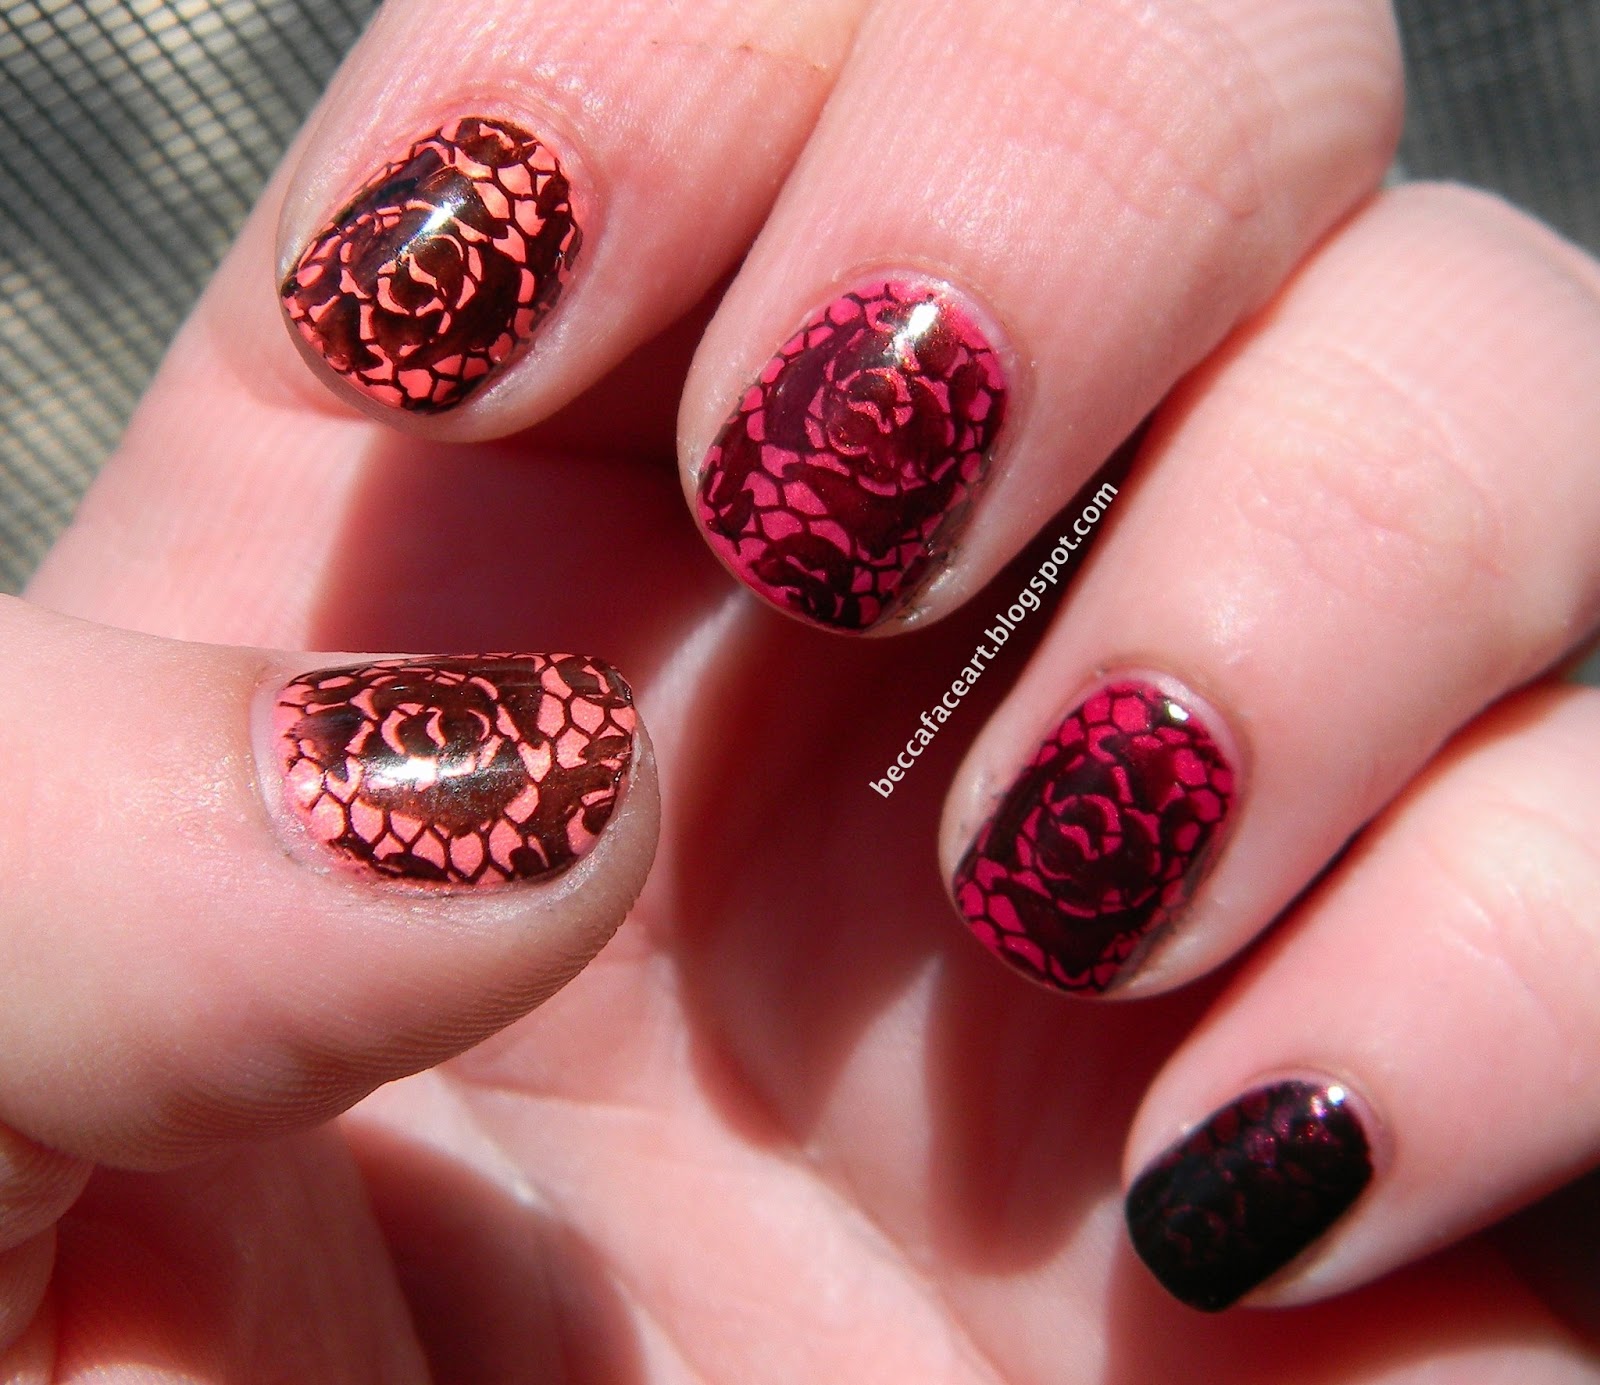 Becca Face Nail Art: Pink Ombre Lace Nails